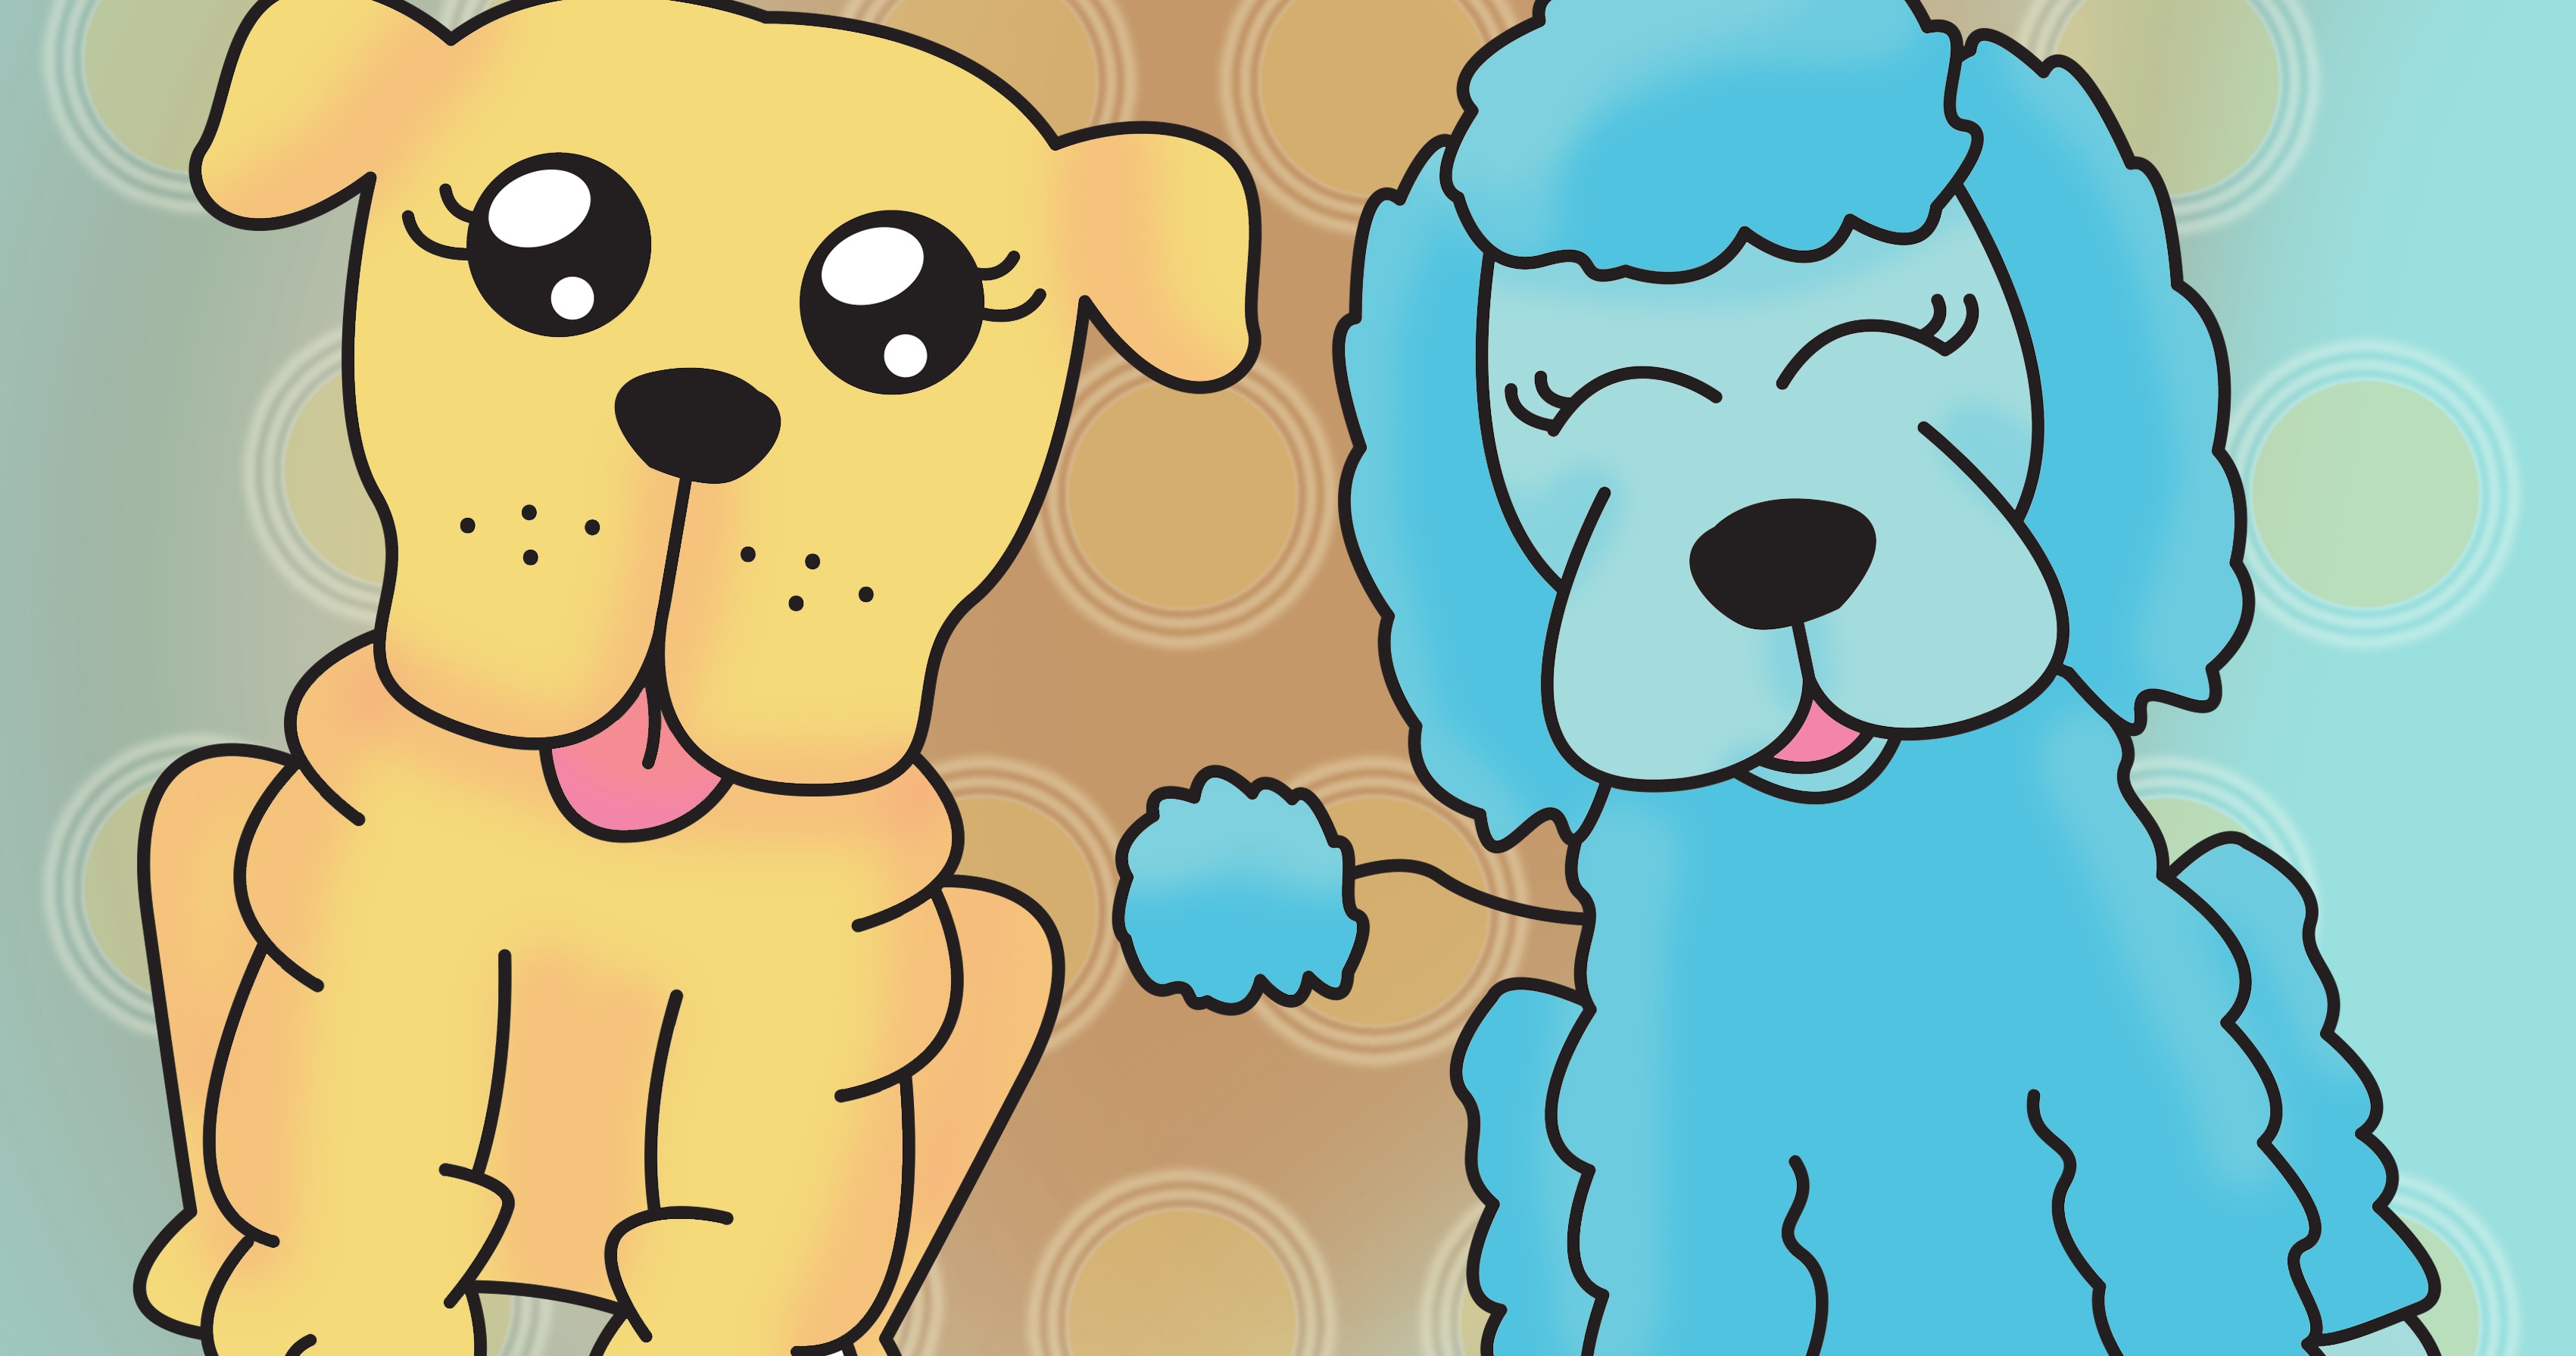 Learn How To Draw Cute Cartoon Dogs! | Small Online Class for Ages 7-12